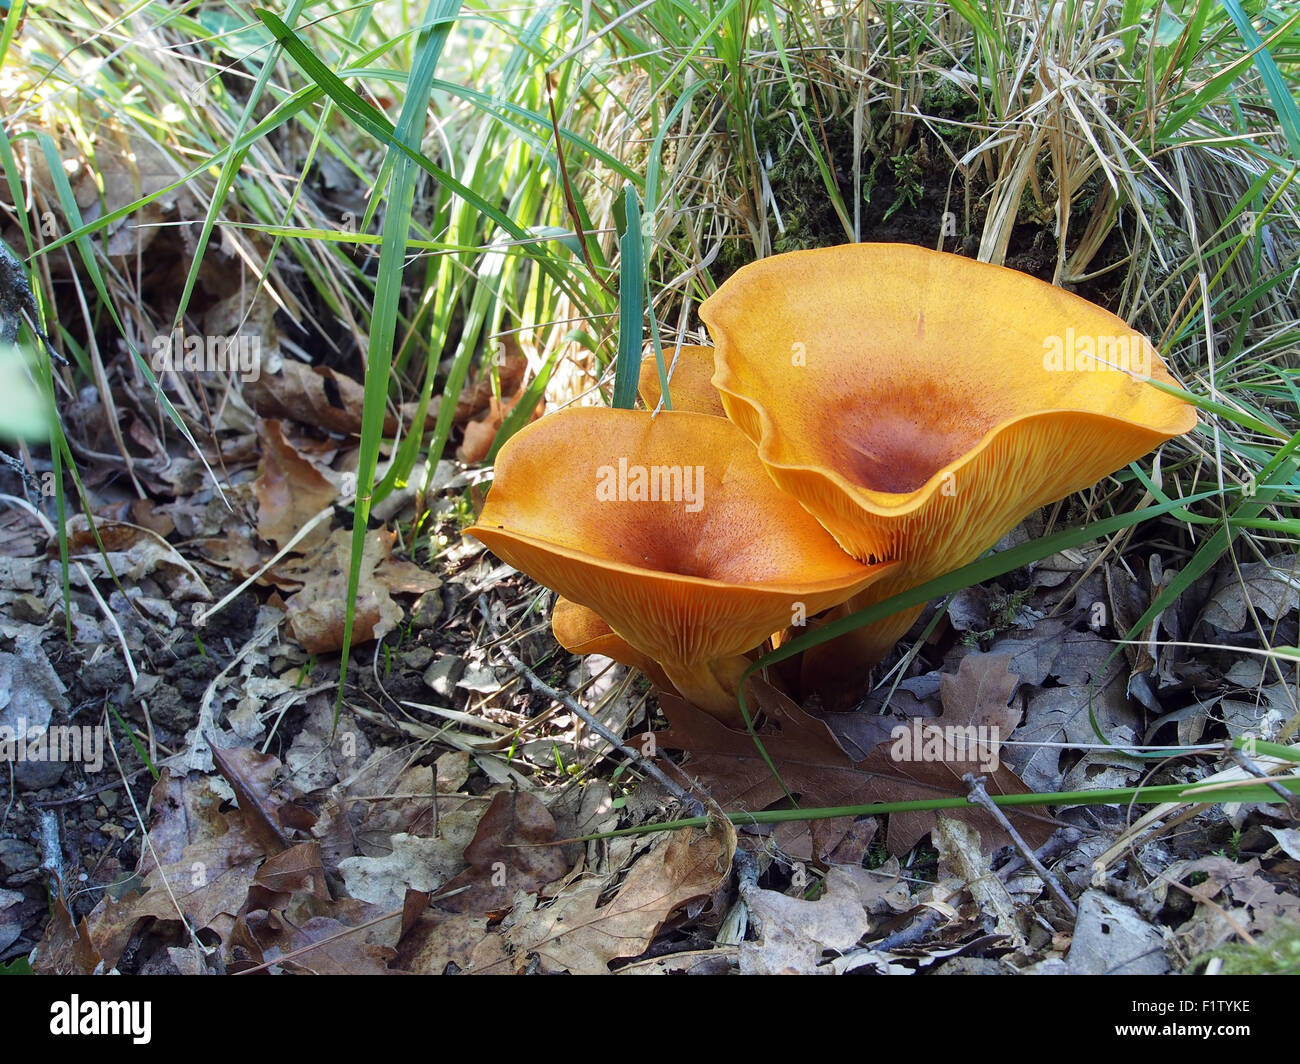 Omphalotus olearius, commonly known as the jack-o'-lantern mushroom, is a poisonous orange gilled mushroom. Bioluminescent. Stock Photo